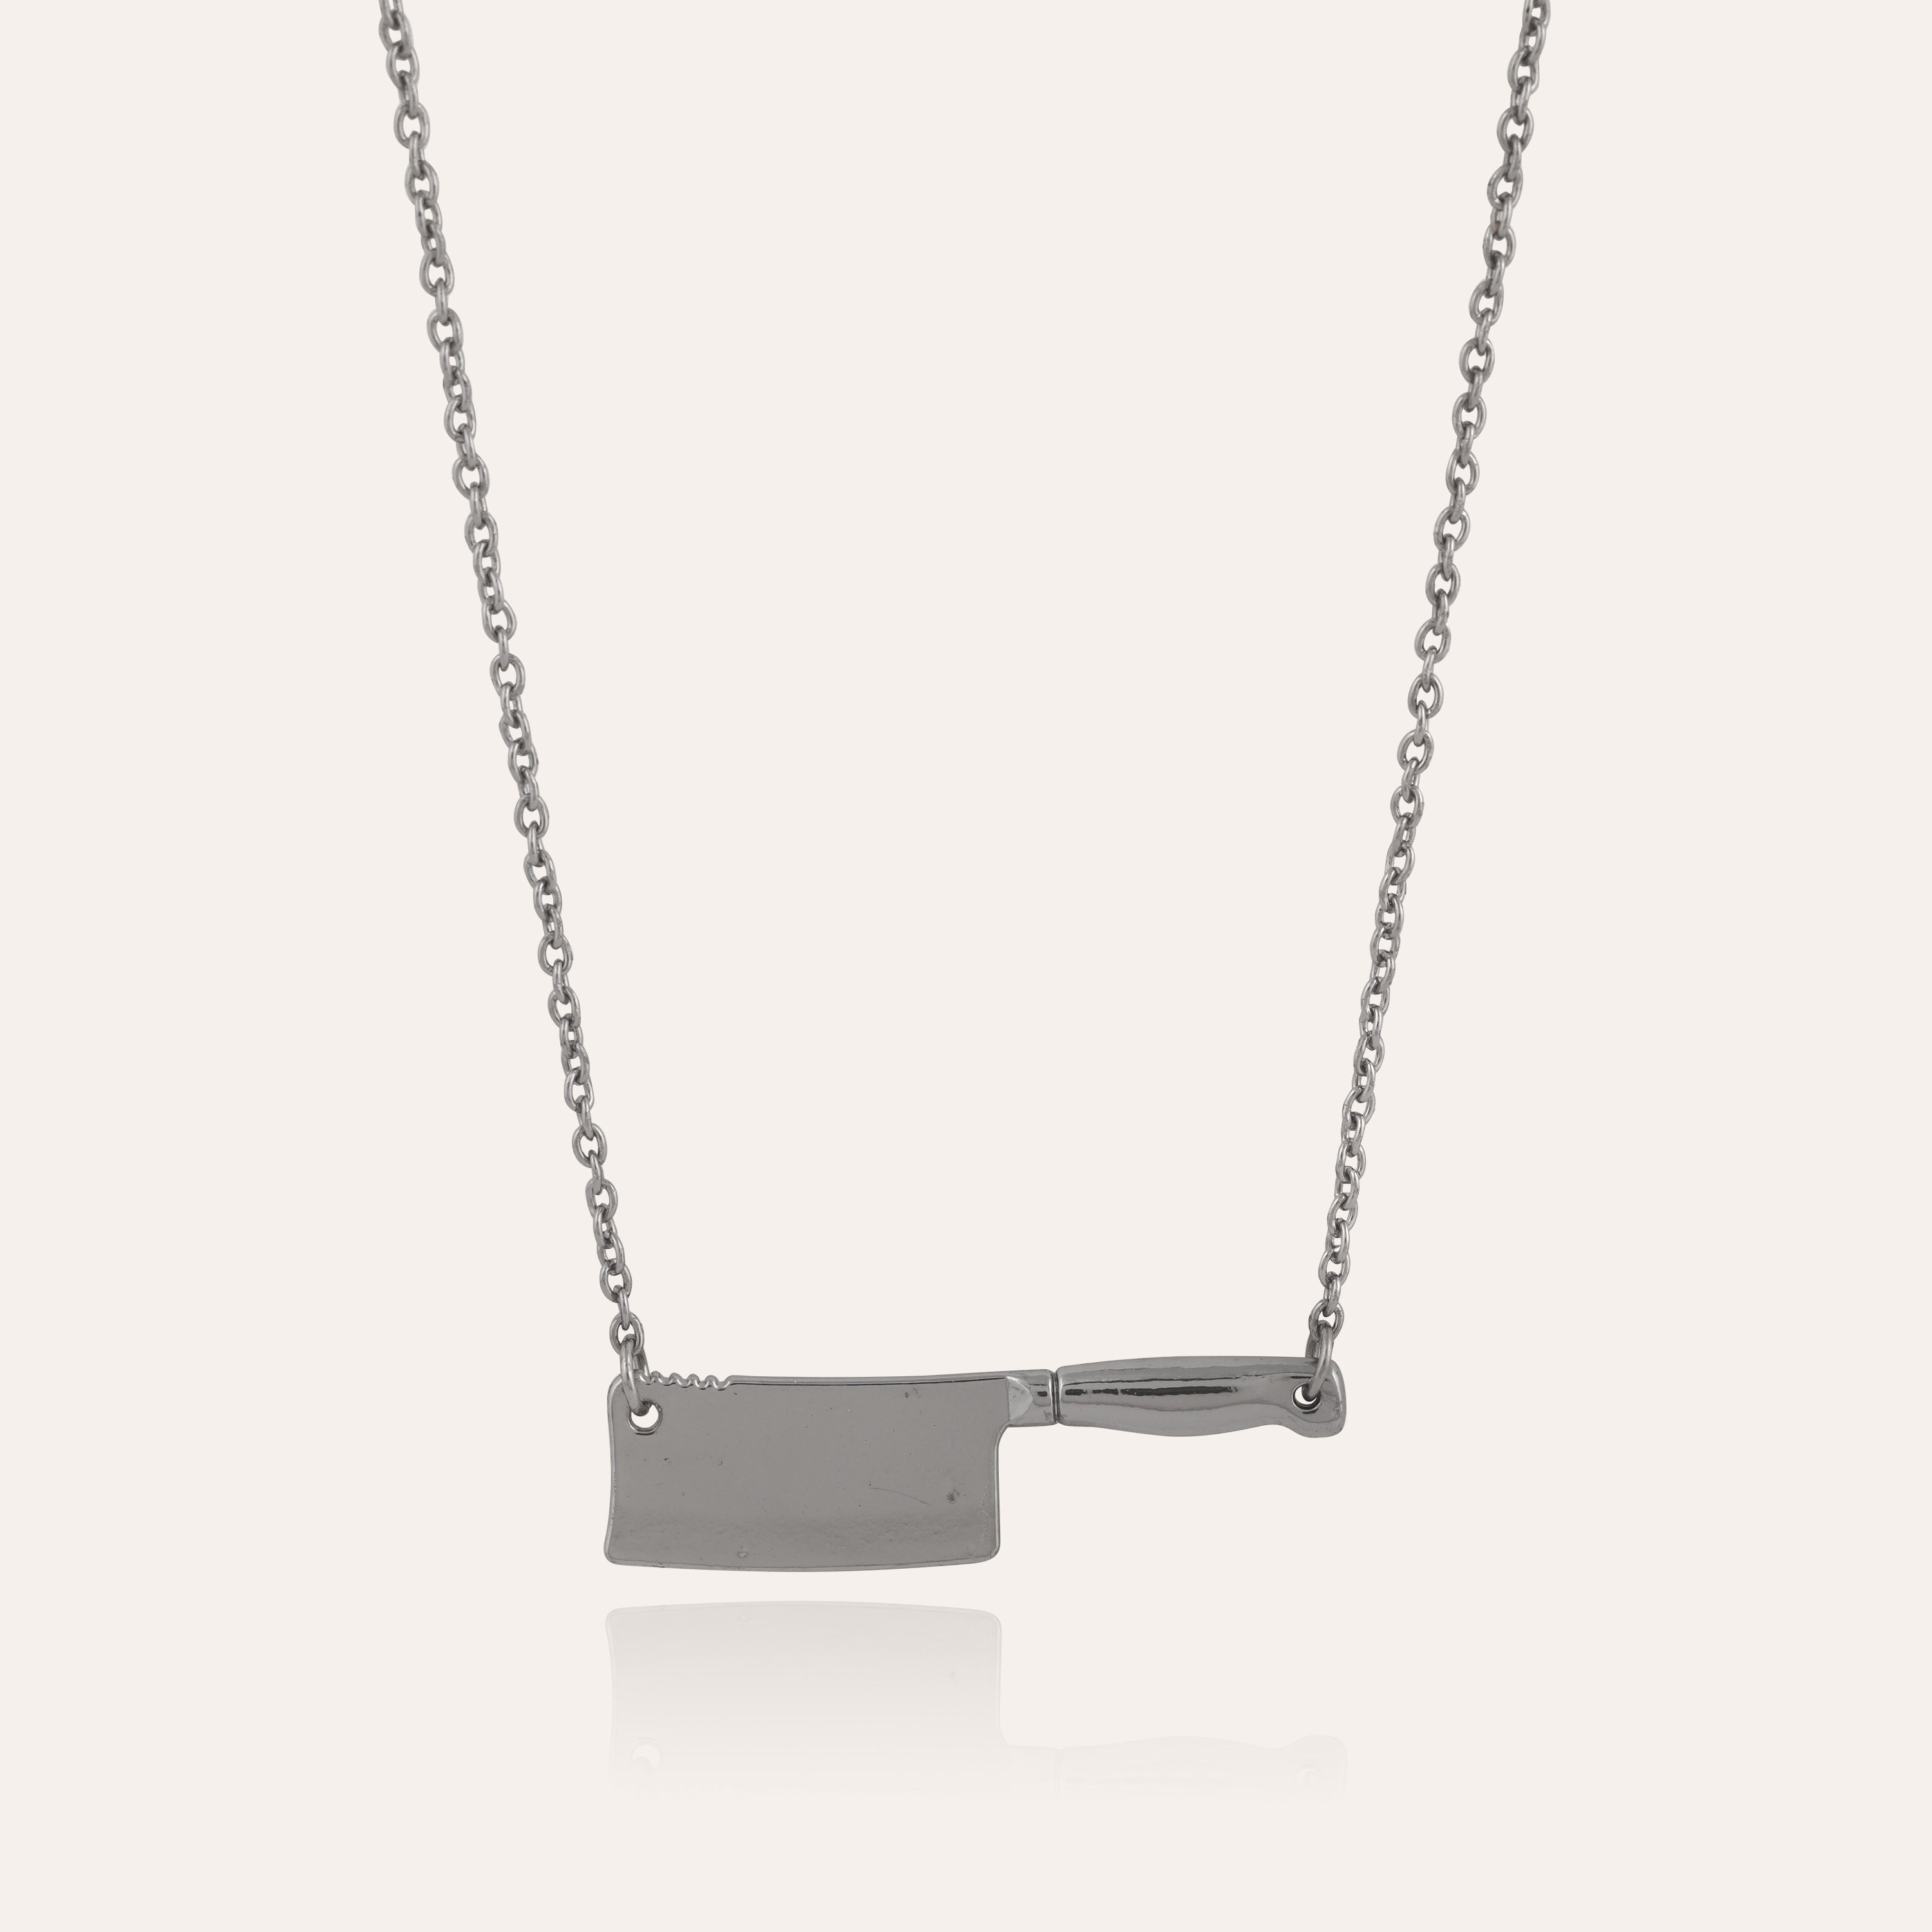 TFC Chop Chop Silver Plated Pendant Necklace-Enhance your elegance with our collection of gold-plated necklaces for women. Choose from stunning pendant necklaces, chic choker necklaces, and trendy layered necklaces. Our sleek and dainty designs are both affordable and anti-tarnish, ensuring lasting beauty. Enjoy the cheapest fashion jewellery, lightweight and stylish- only at The Fun Company